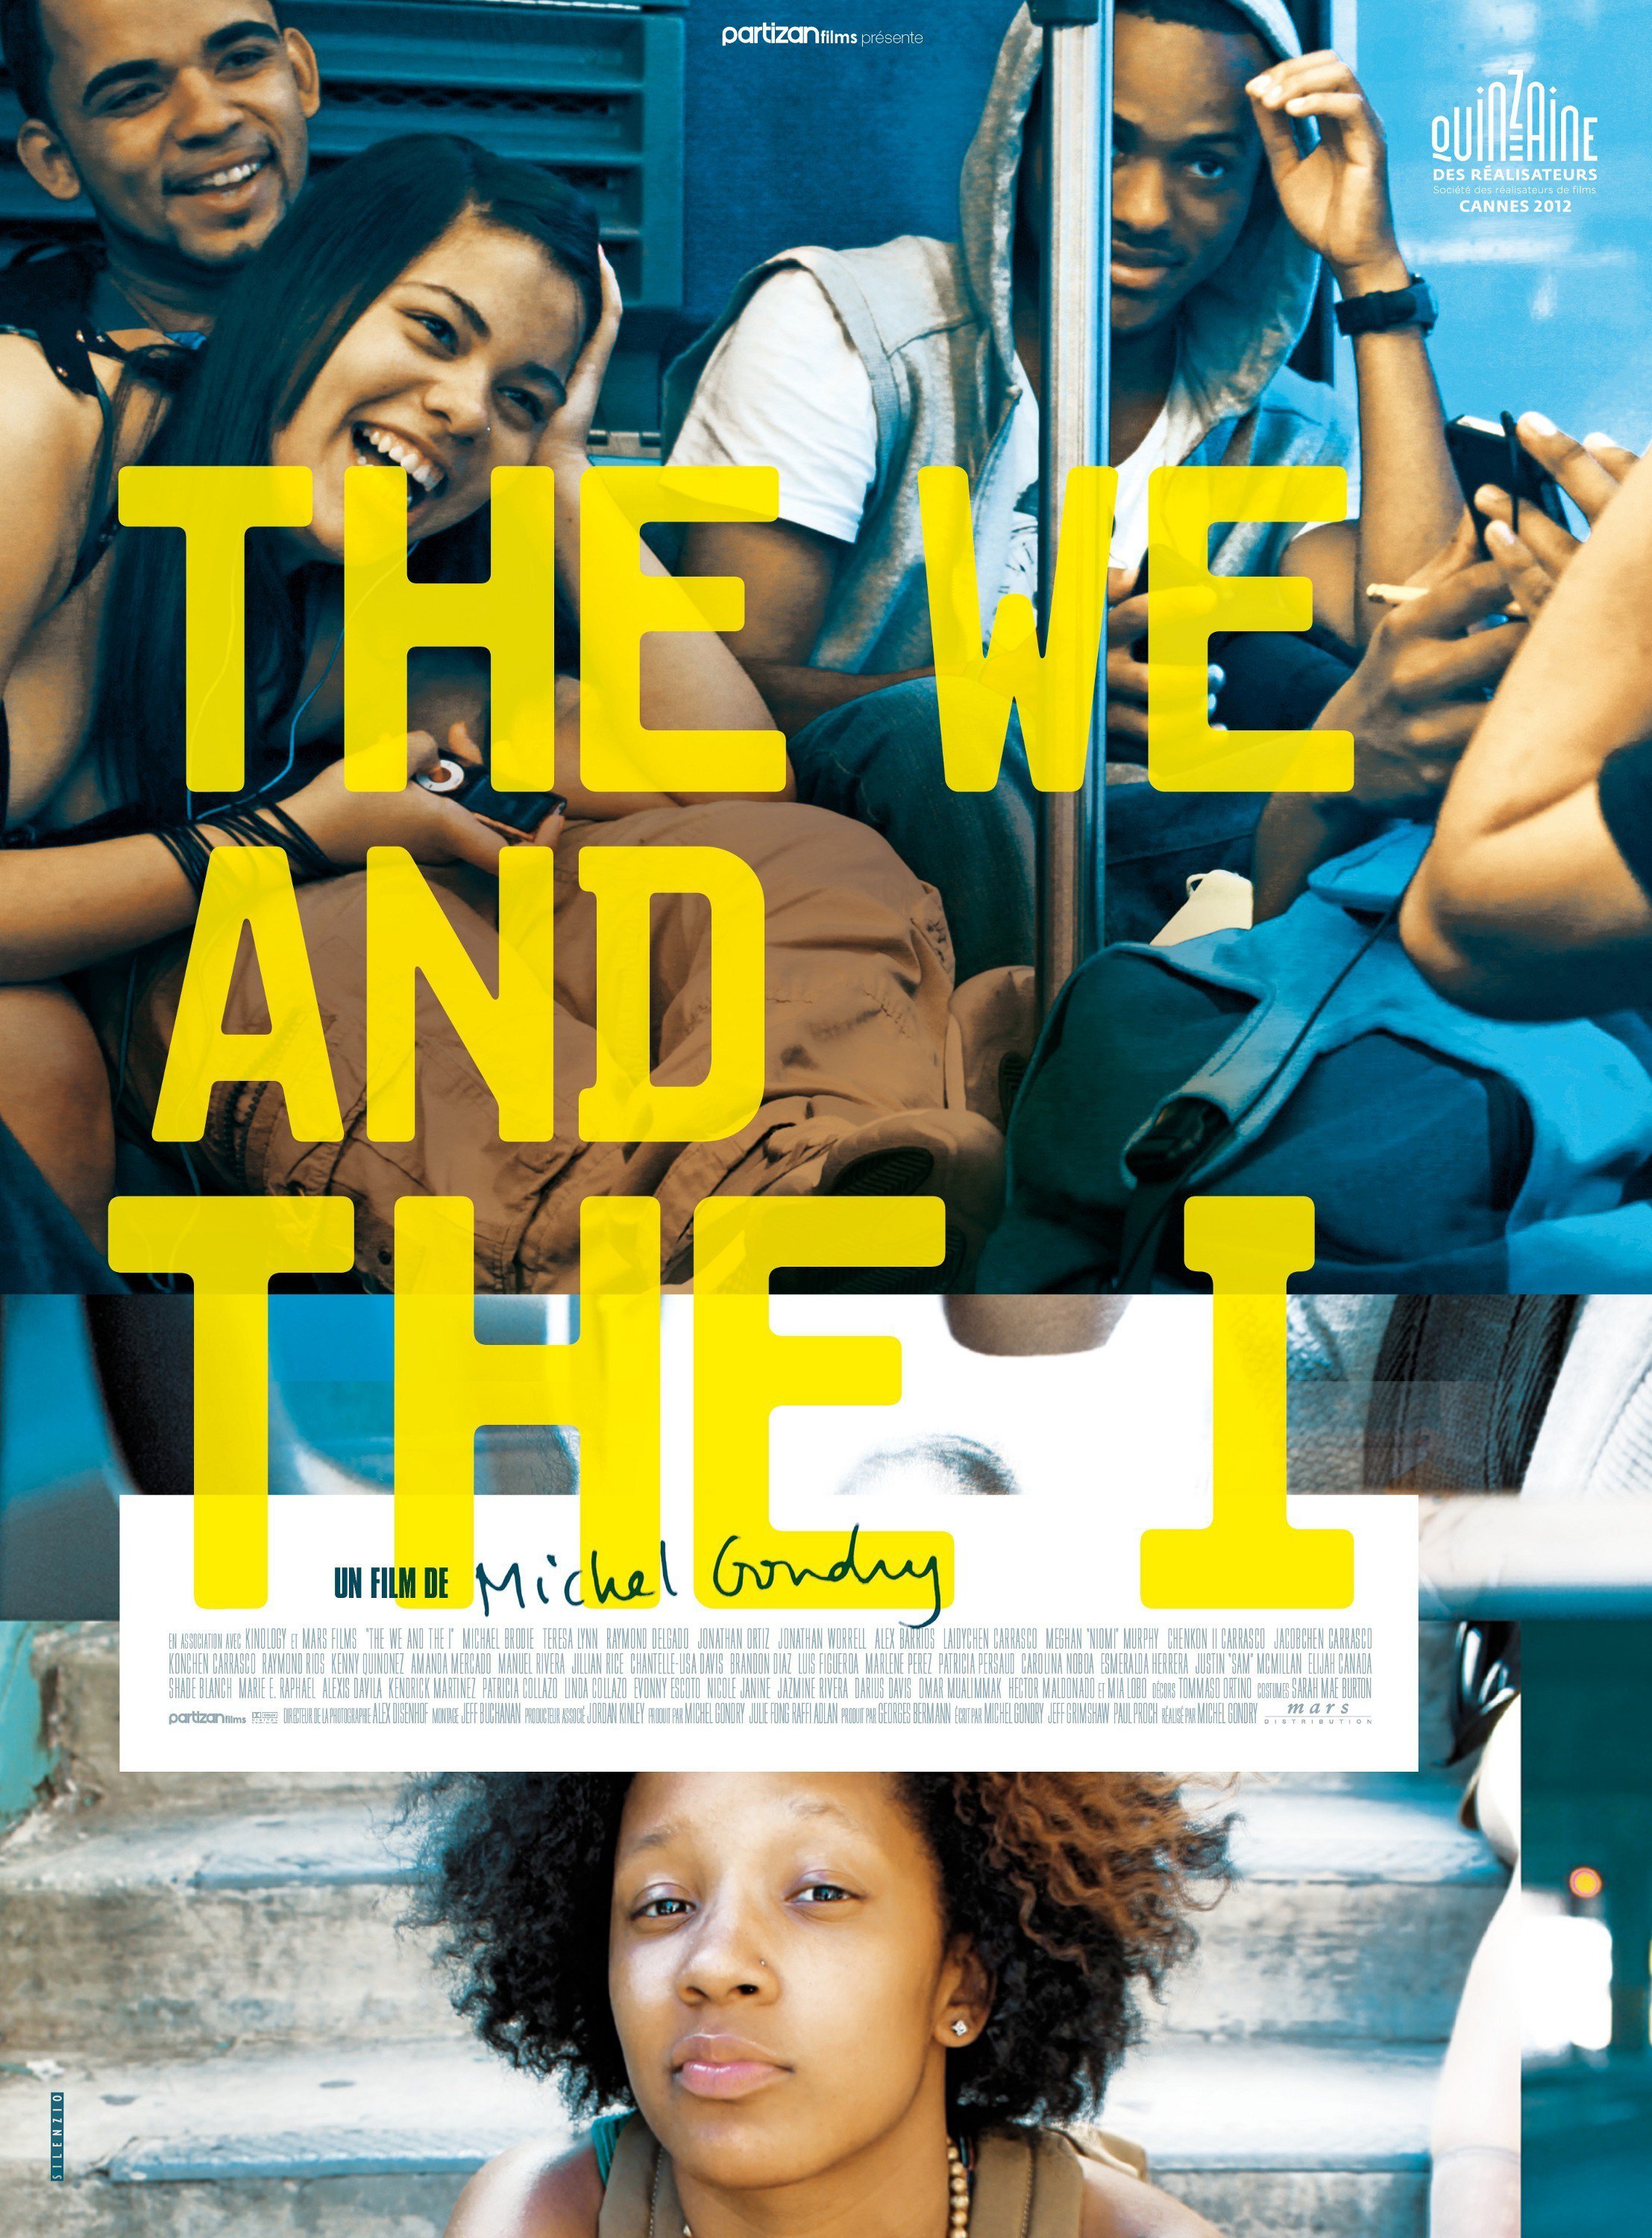 affiche du film The We and the I